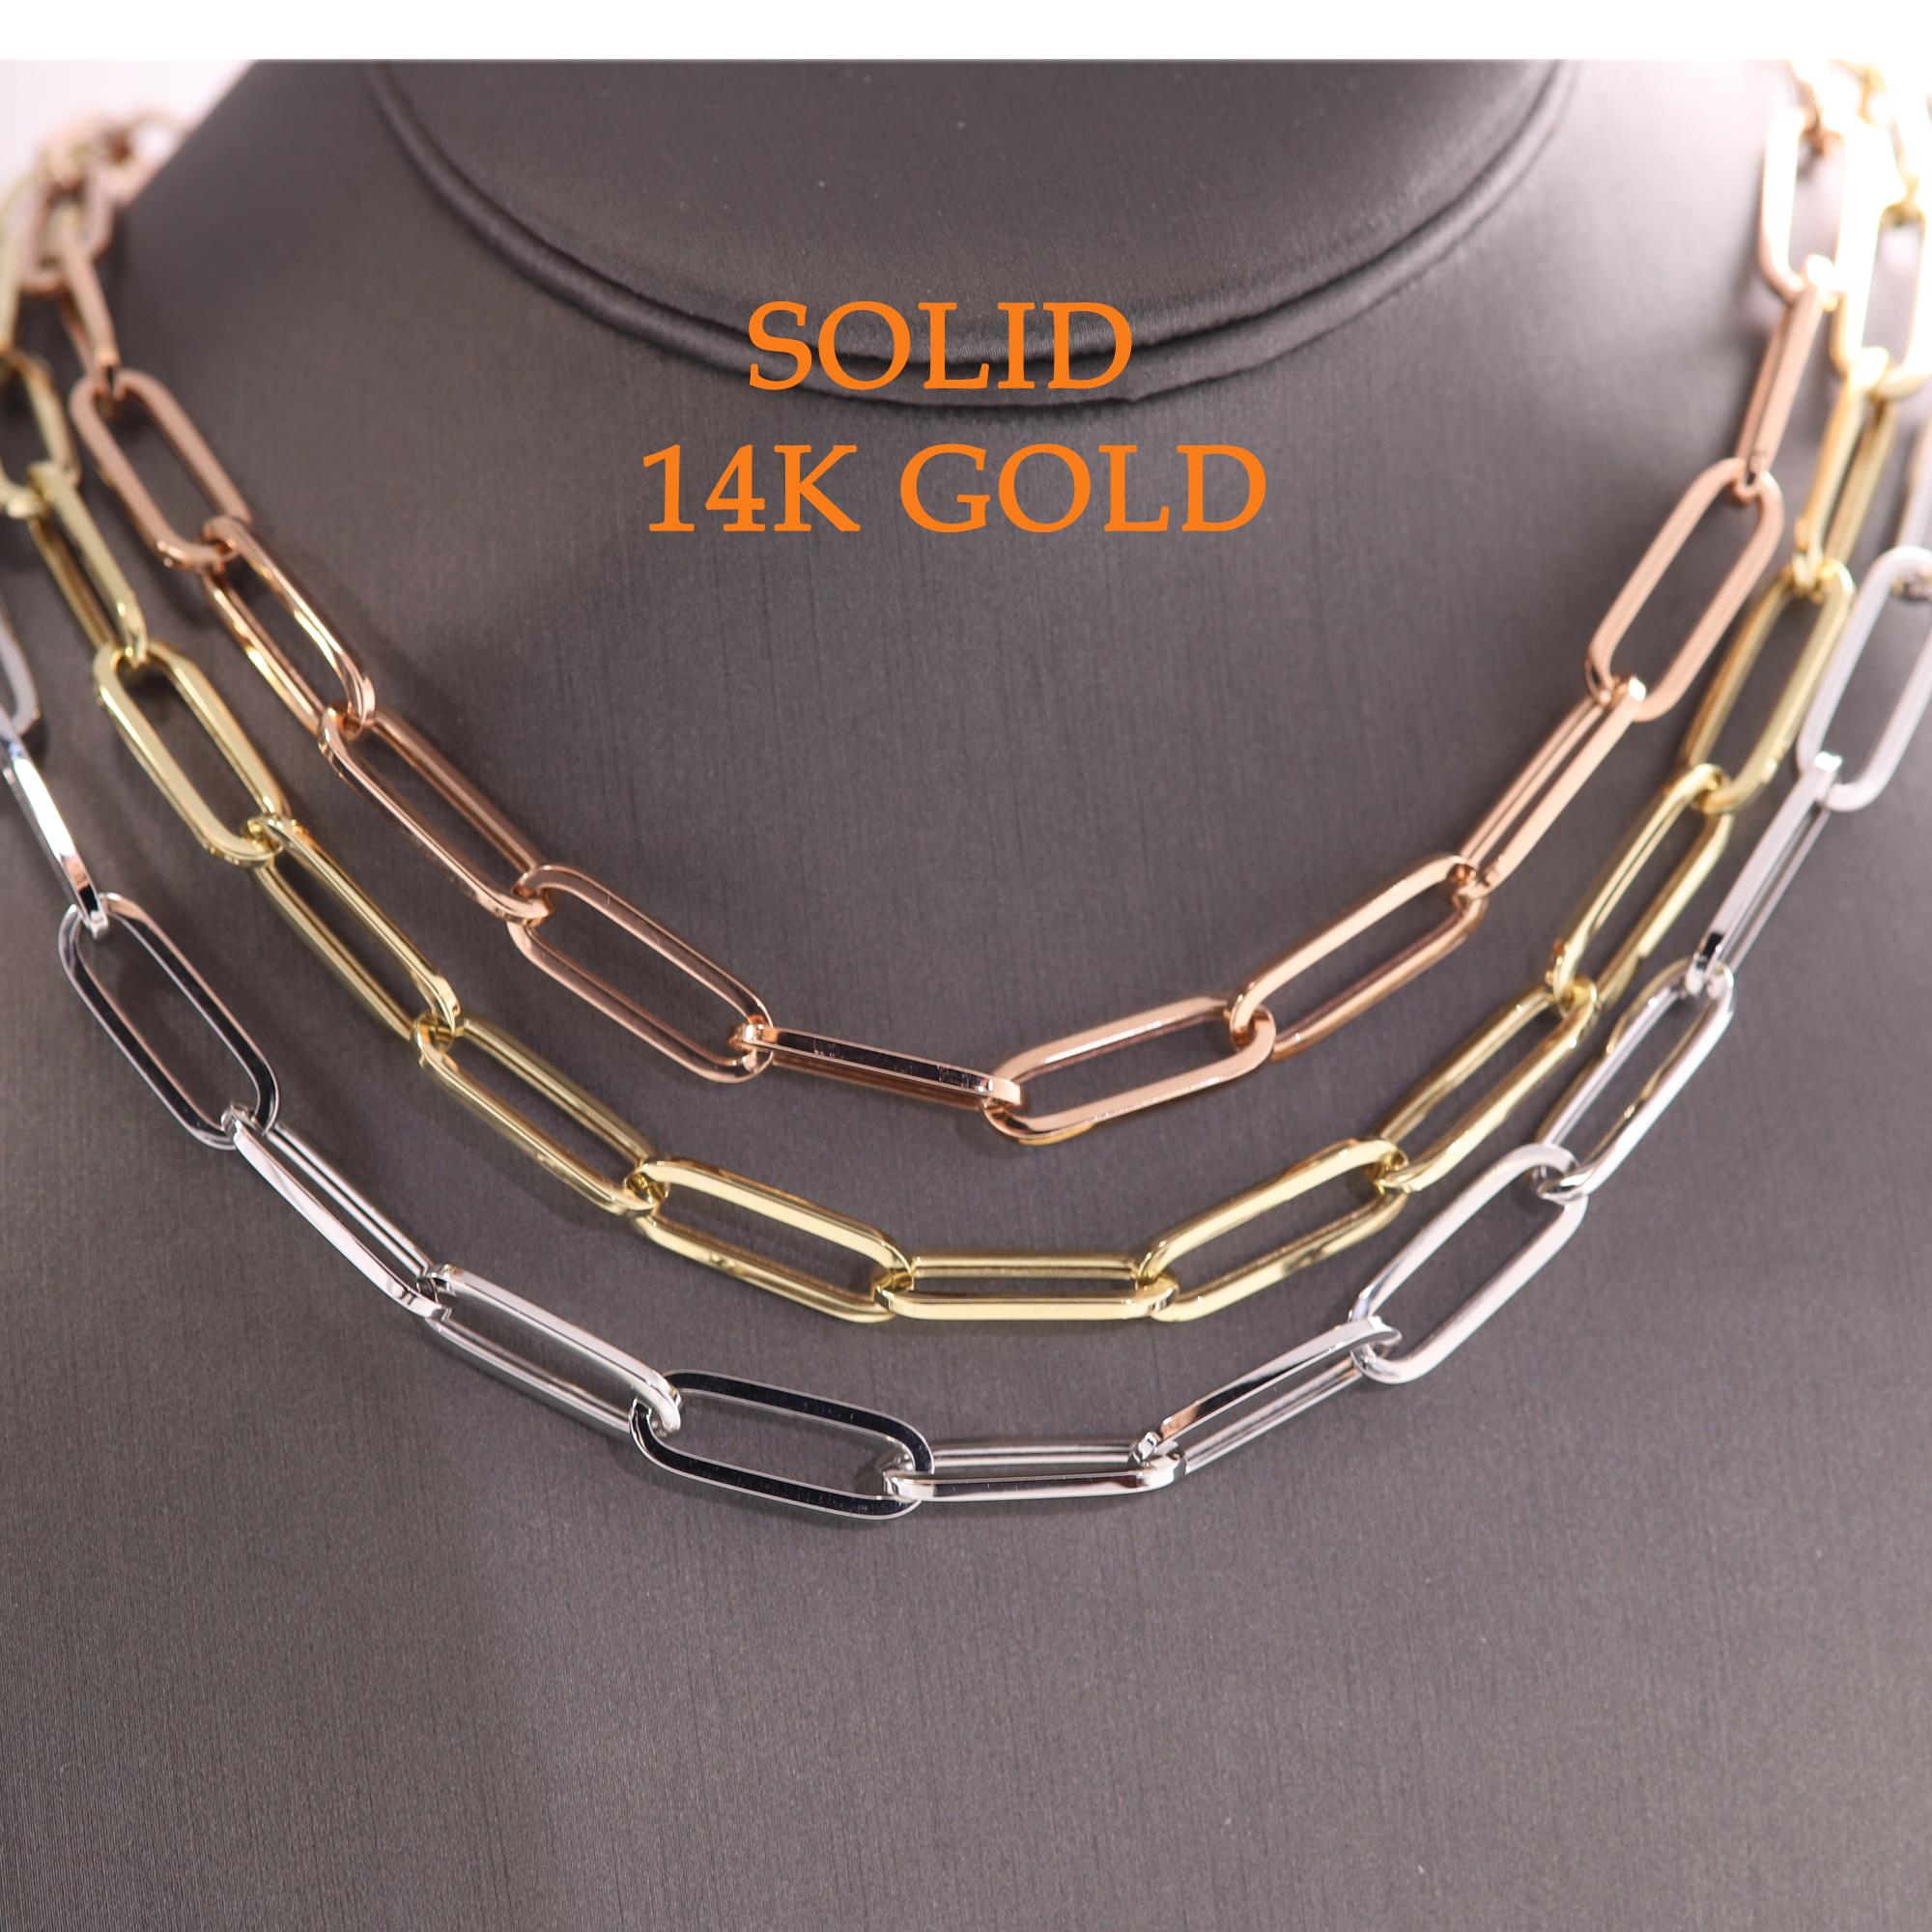 Women's Italian Paper Clip Gold Chain Necklace Link Chain 14 Karat Gold 18' Inch Long For Sale